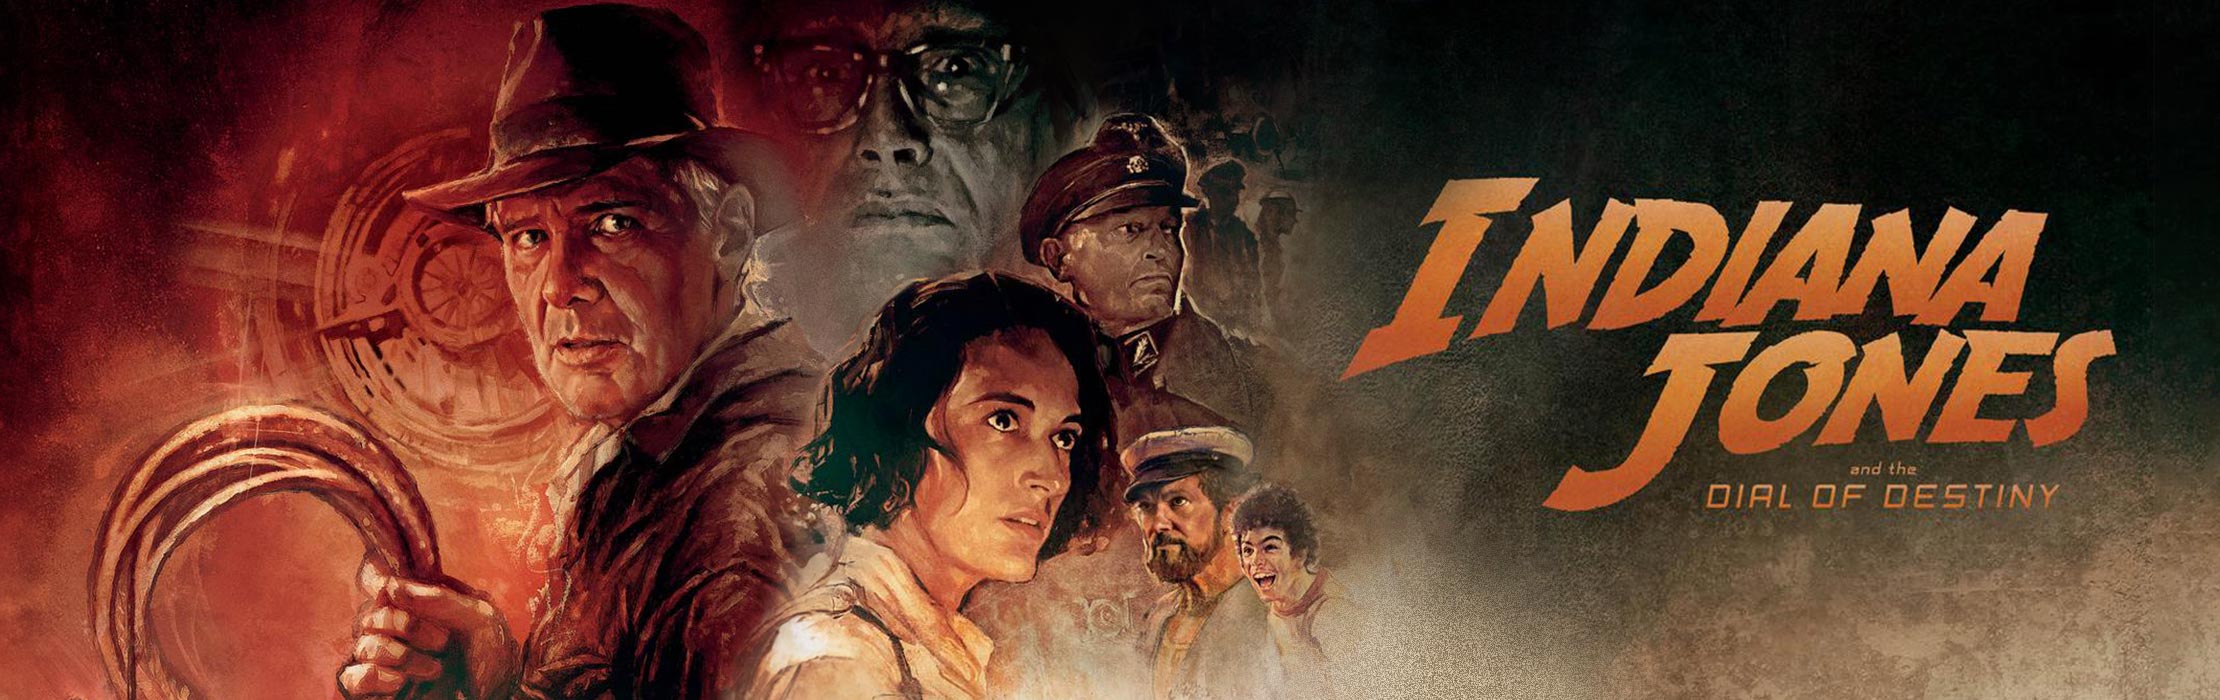 Indiana Jones and the Dial of Destiny |